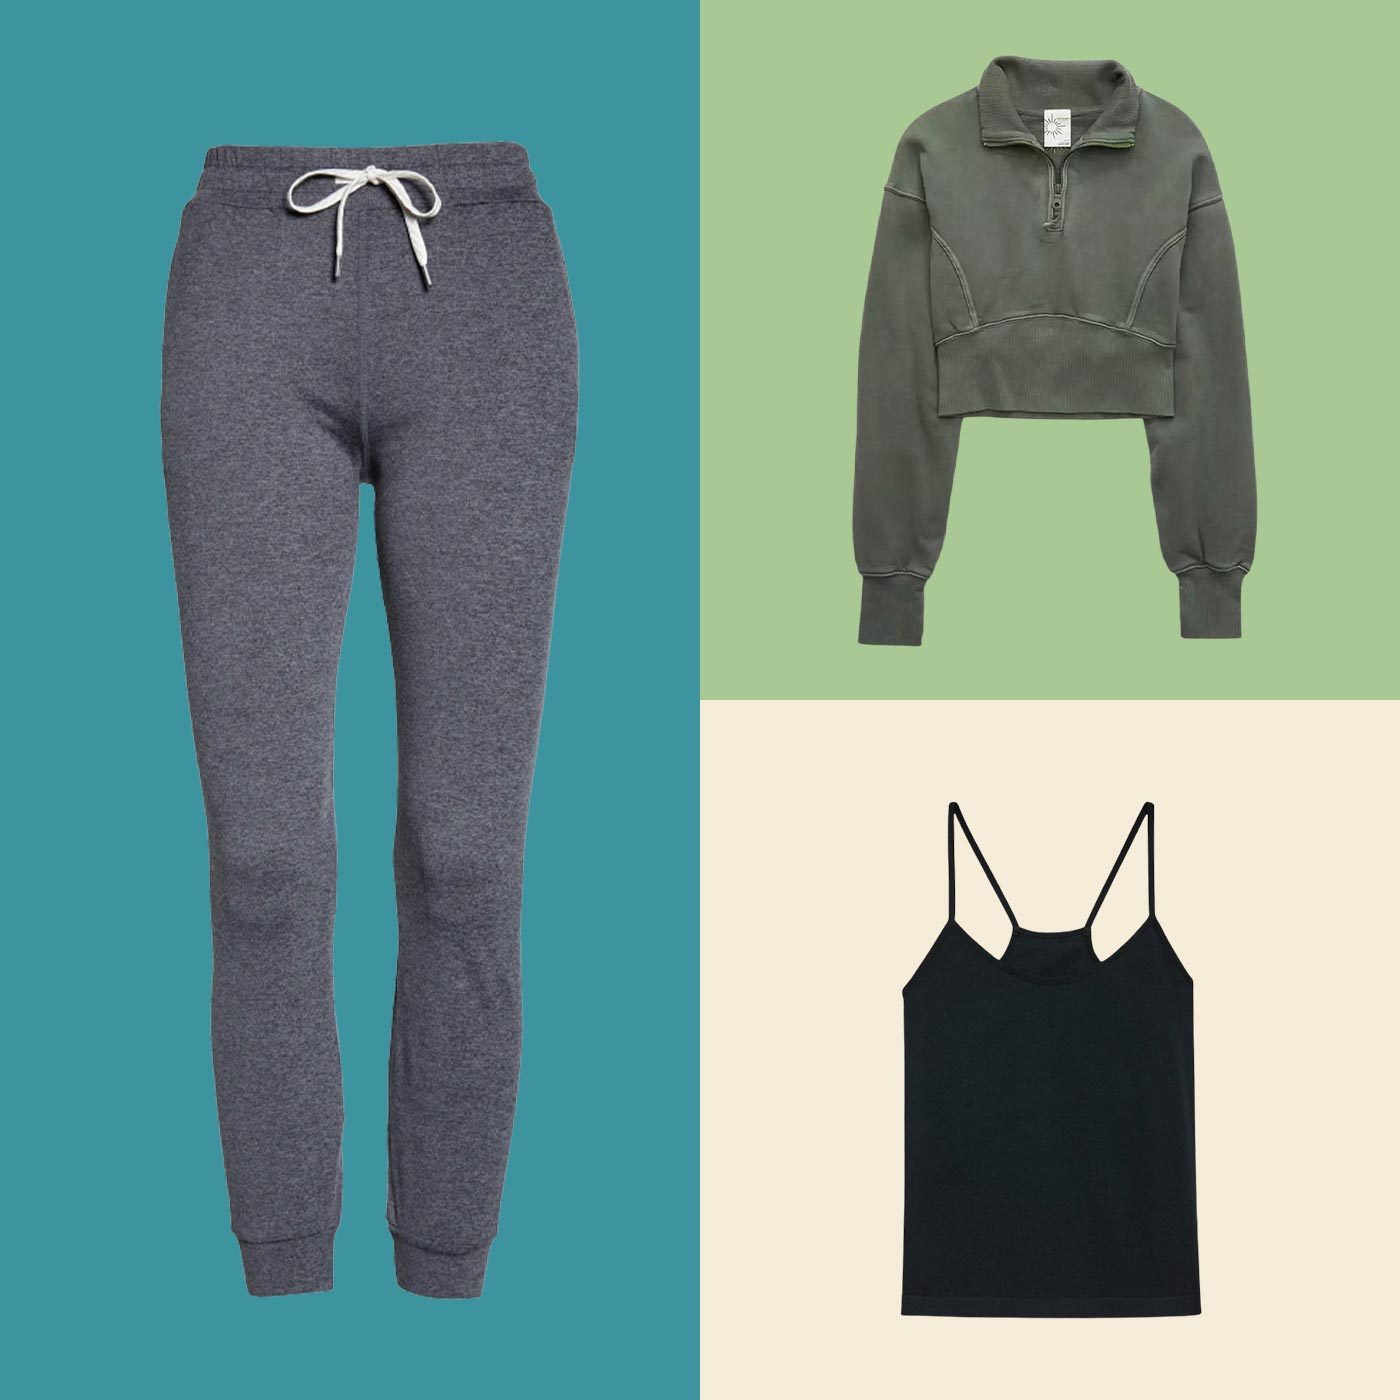 https://www.rd.com/wp-content/uploads/2023/01/The-Best-Womens-Activewear-at-Every-Price-Point_FT.jpg